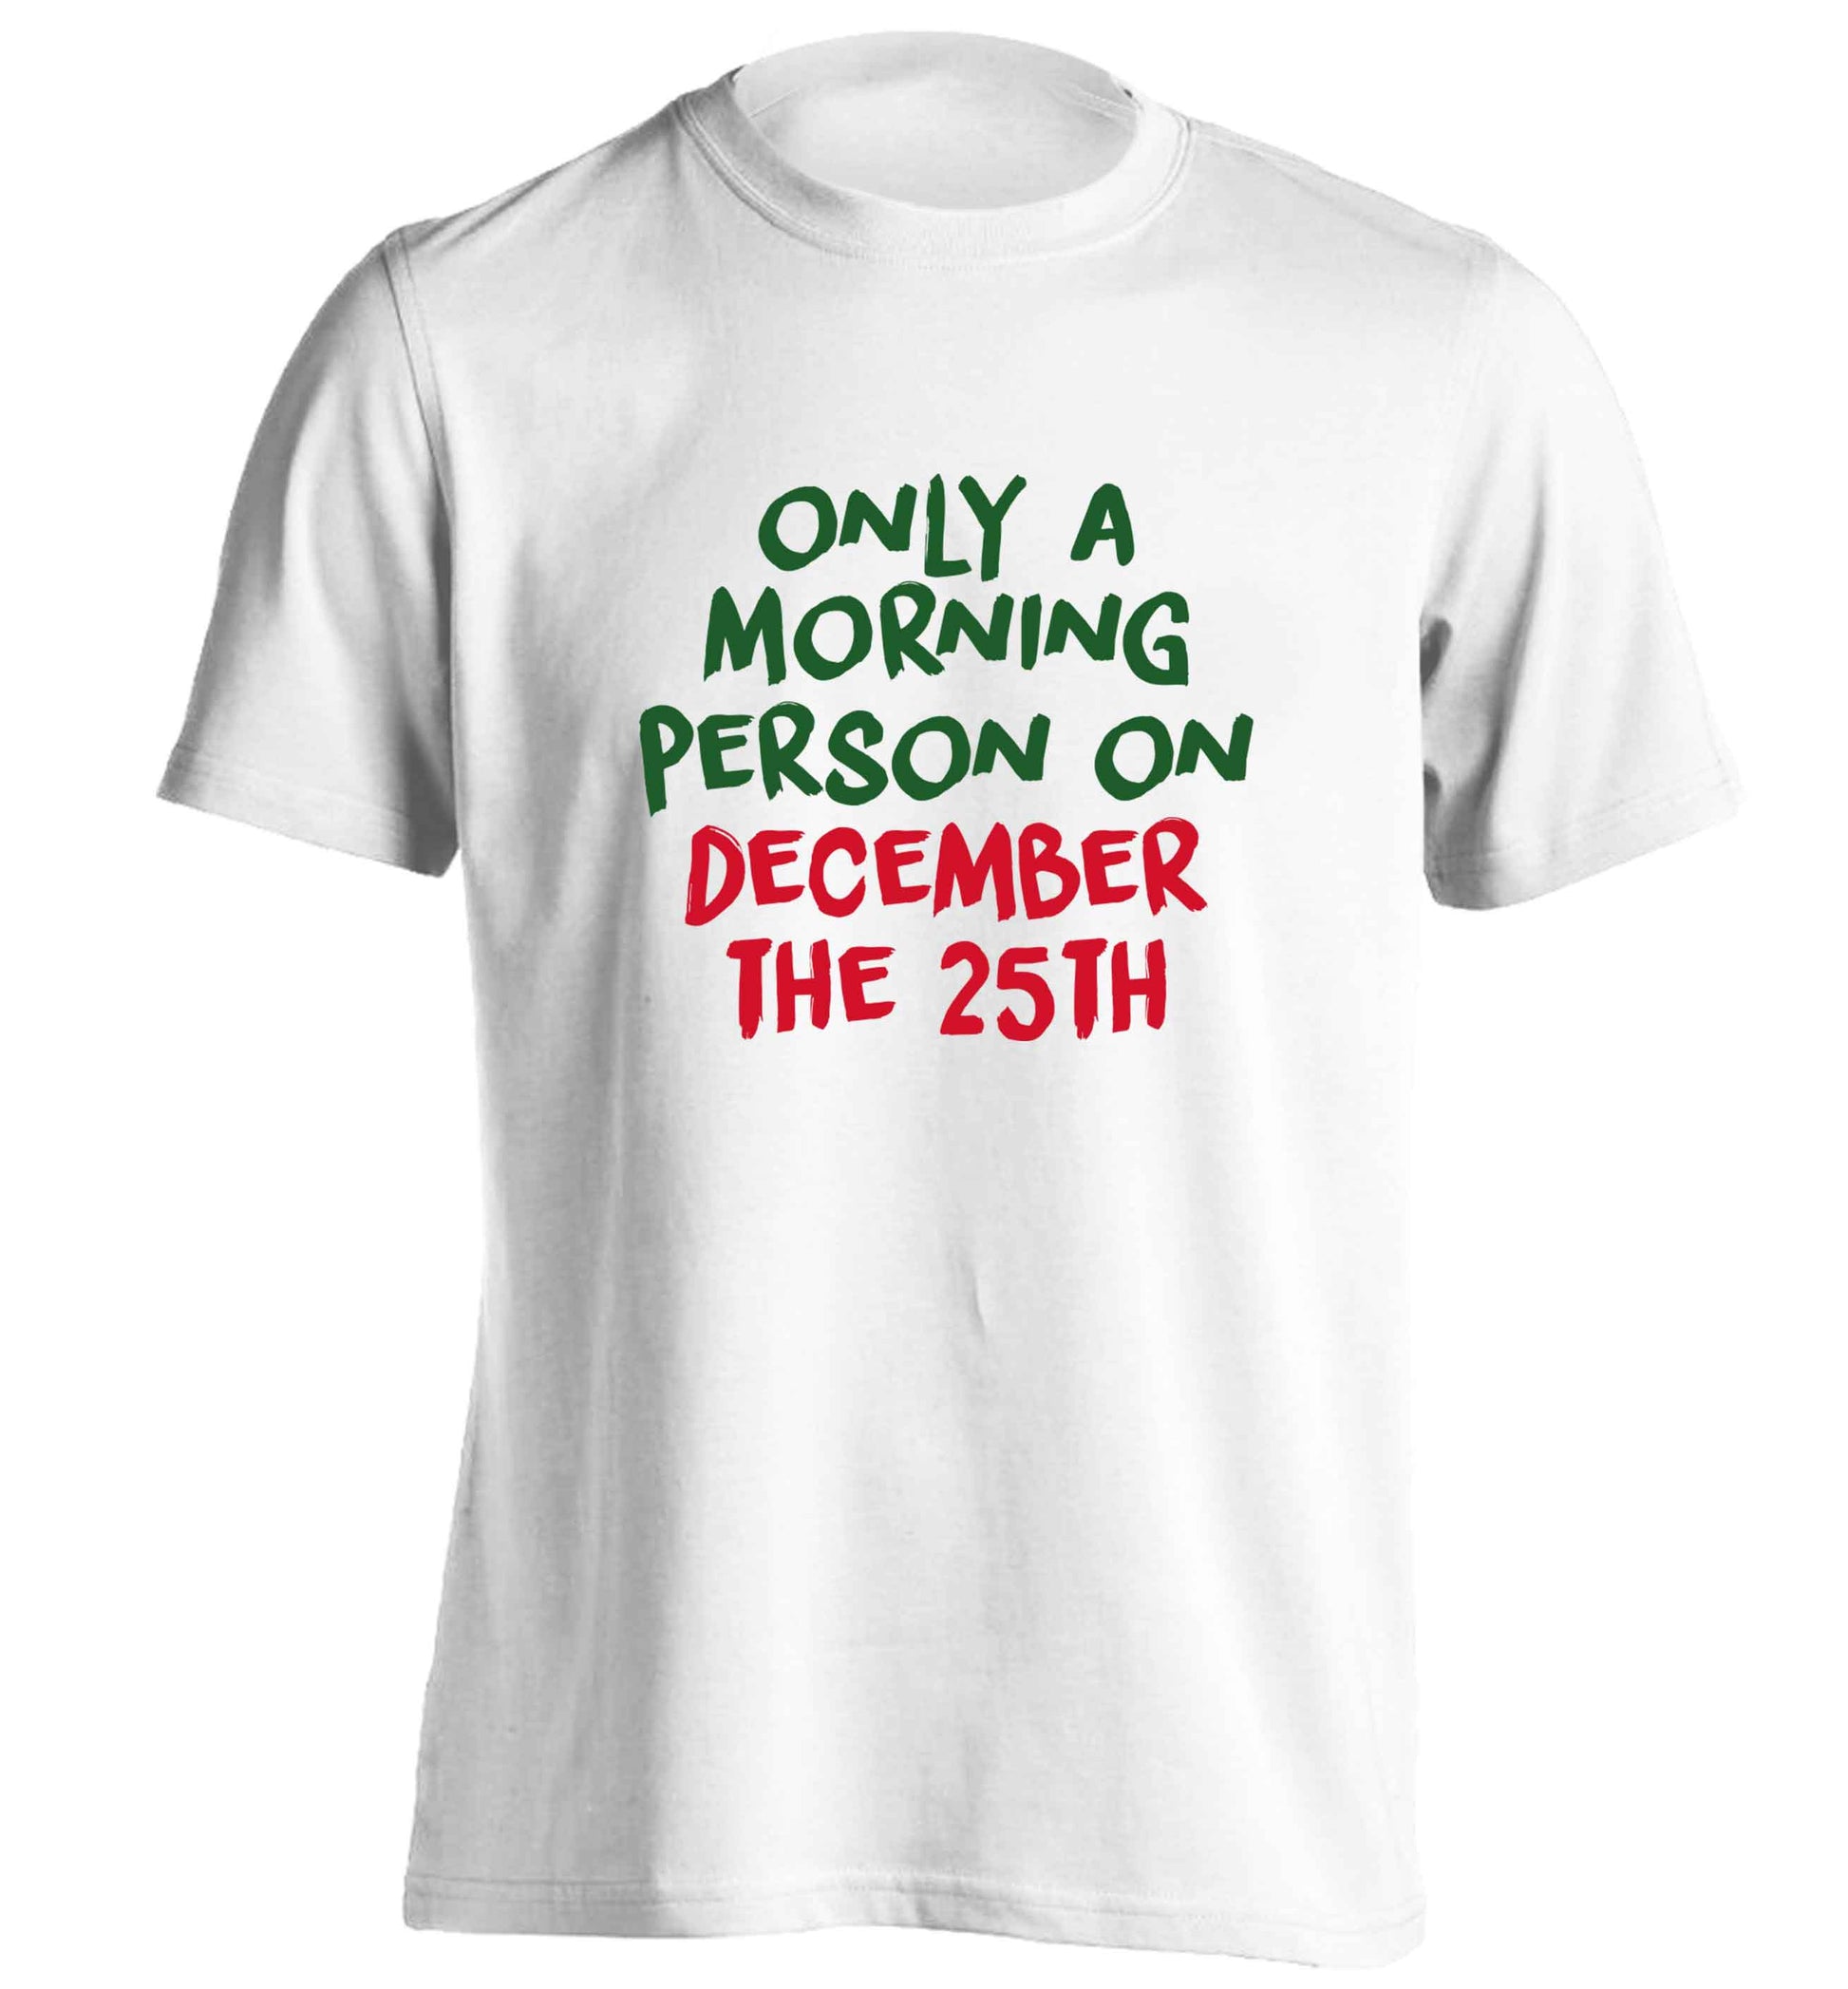 I'm only a morning person on December the 25th adults unisex white Tshirt 2XL